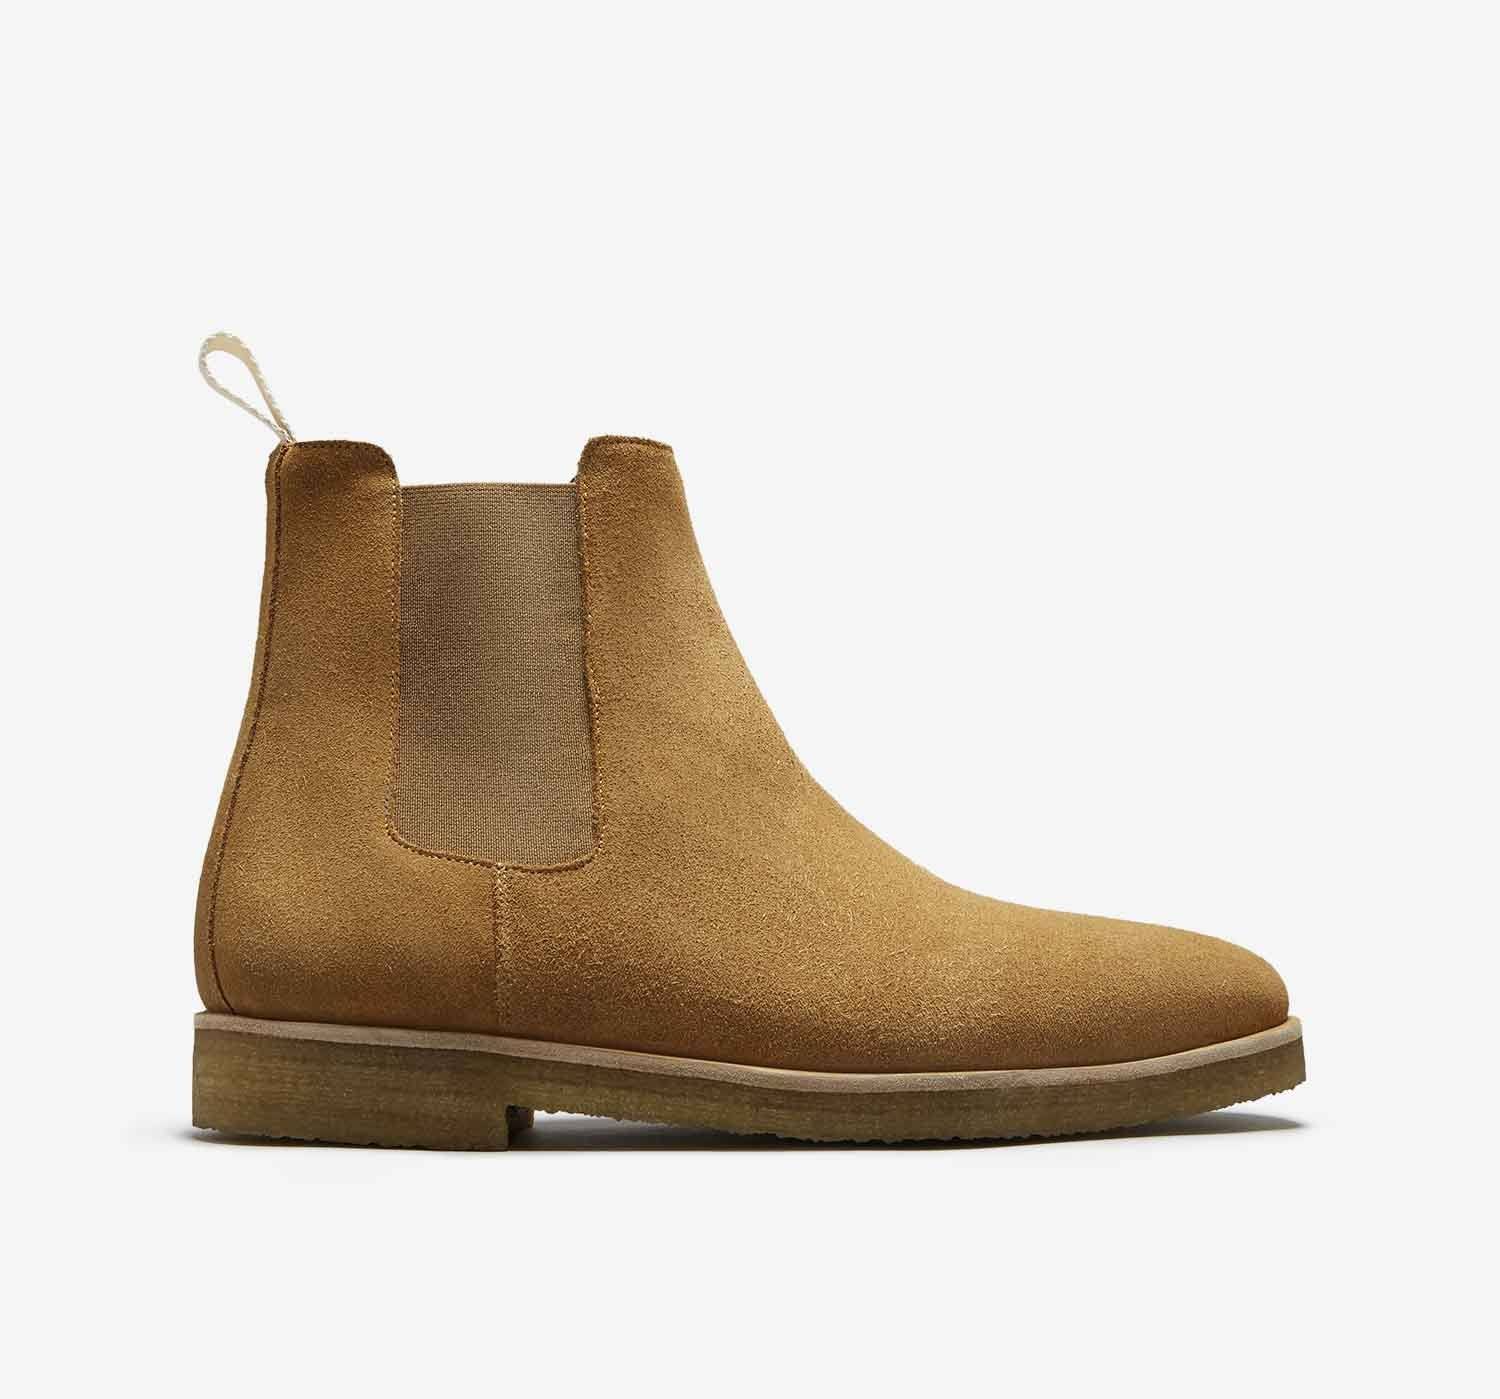 Chelsea Boots: What Makes Popular? Oliver Cabell